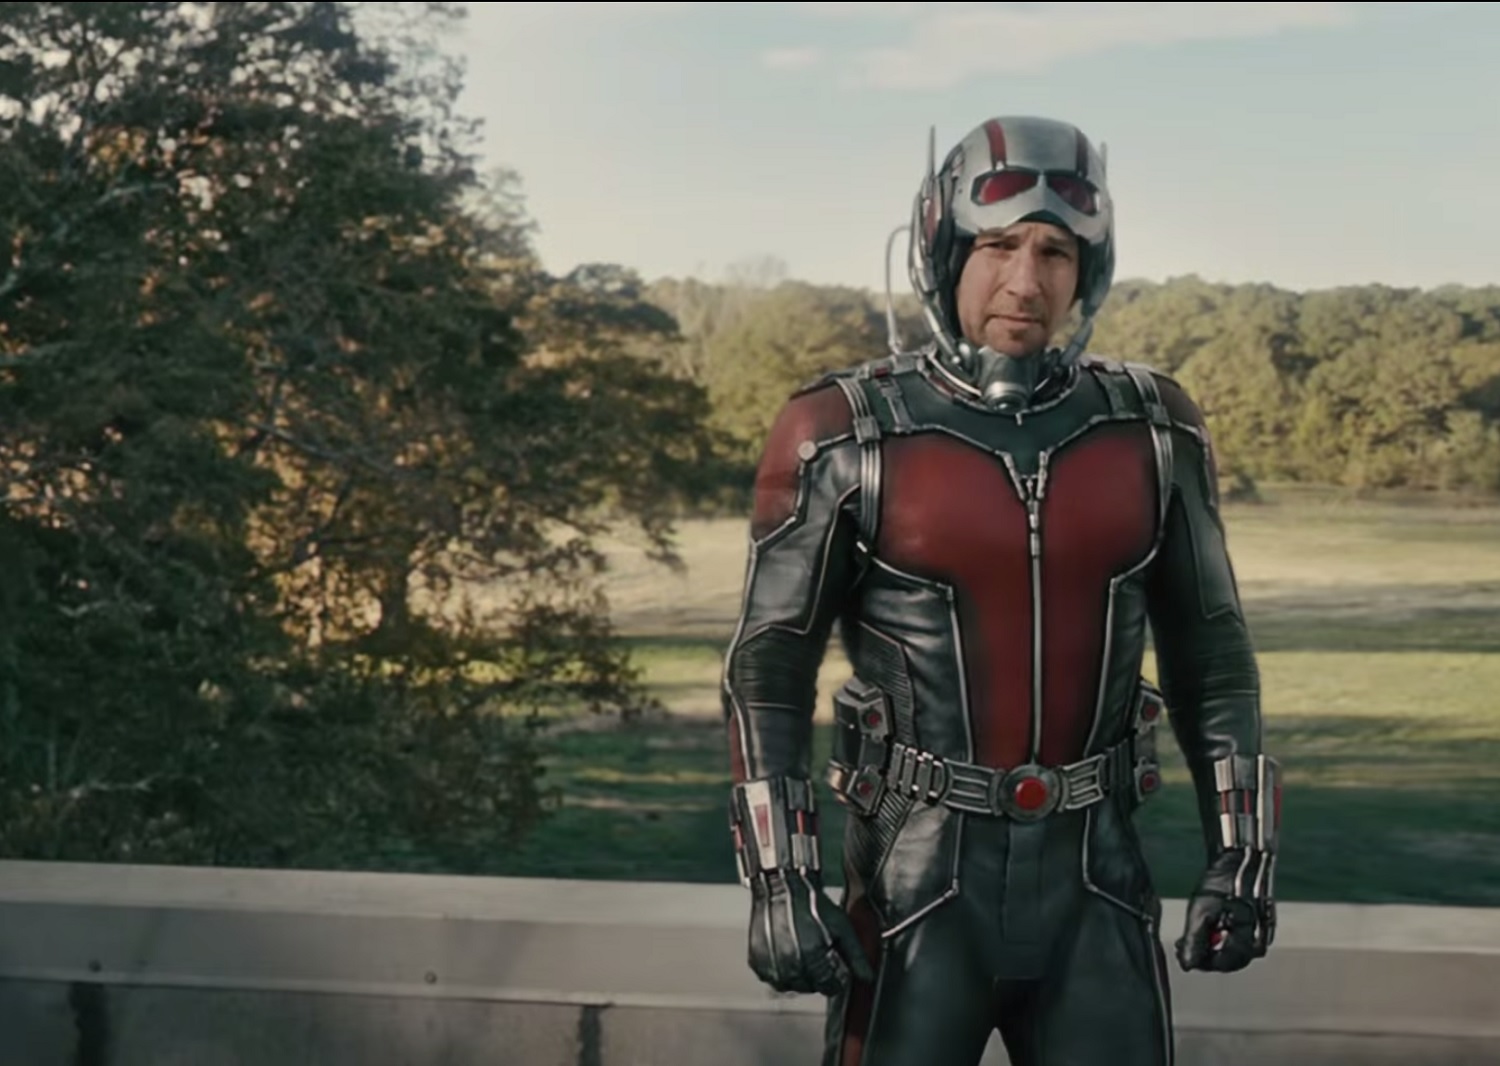 Actor Paul Of Ant Man